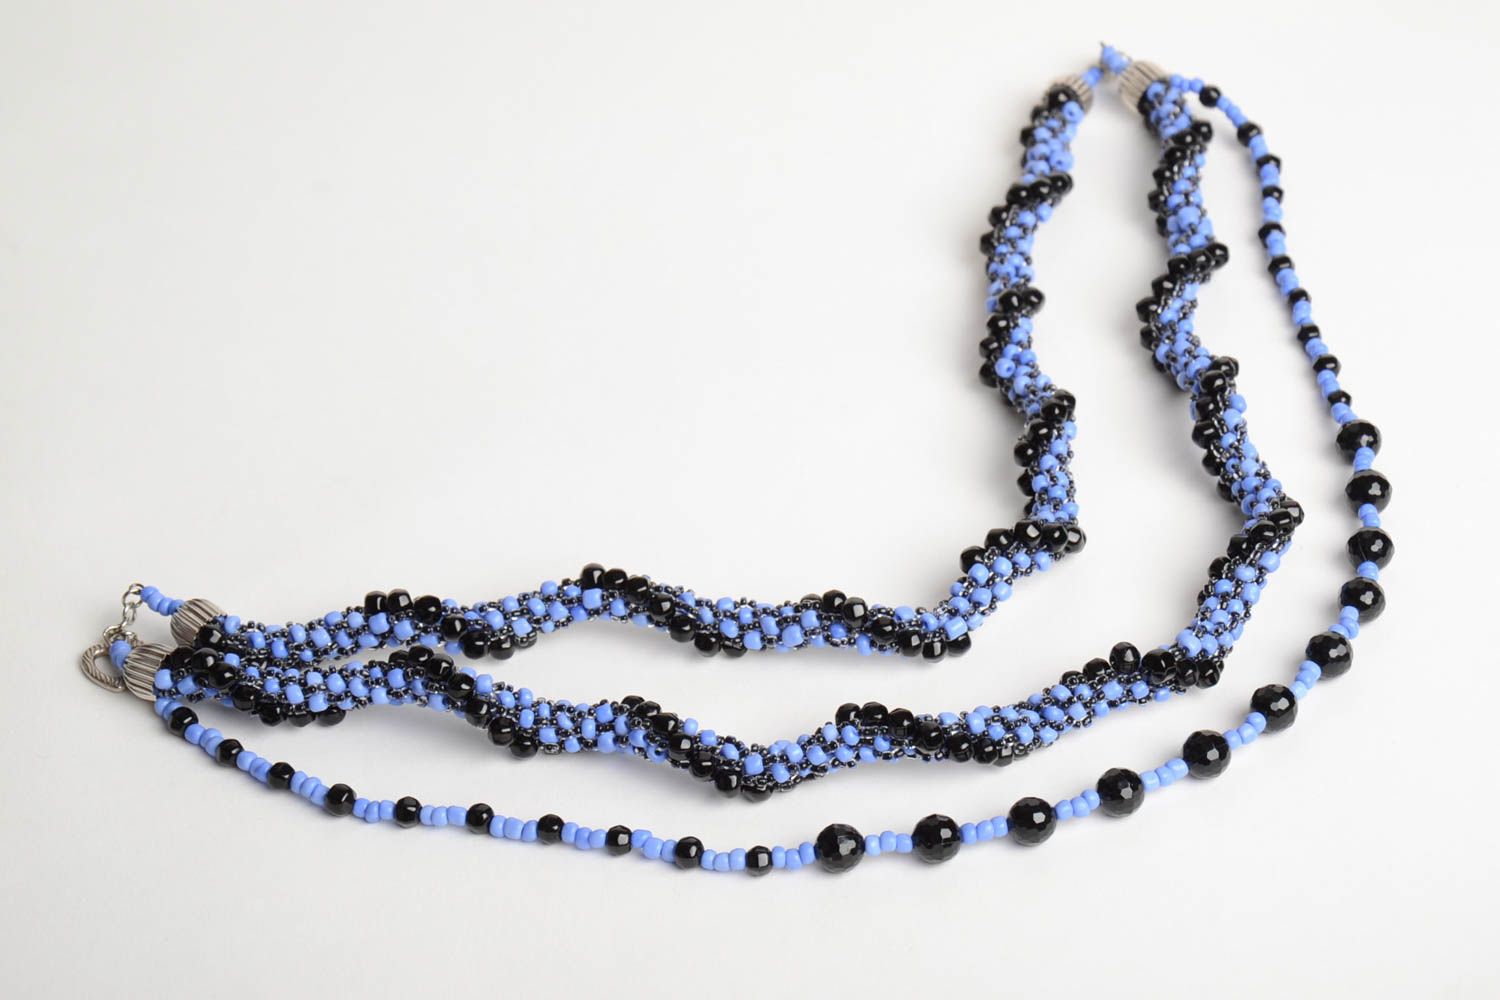 Handmade multi row women's necklace crocheted of blue and black Czech beads photo 3